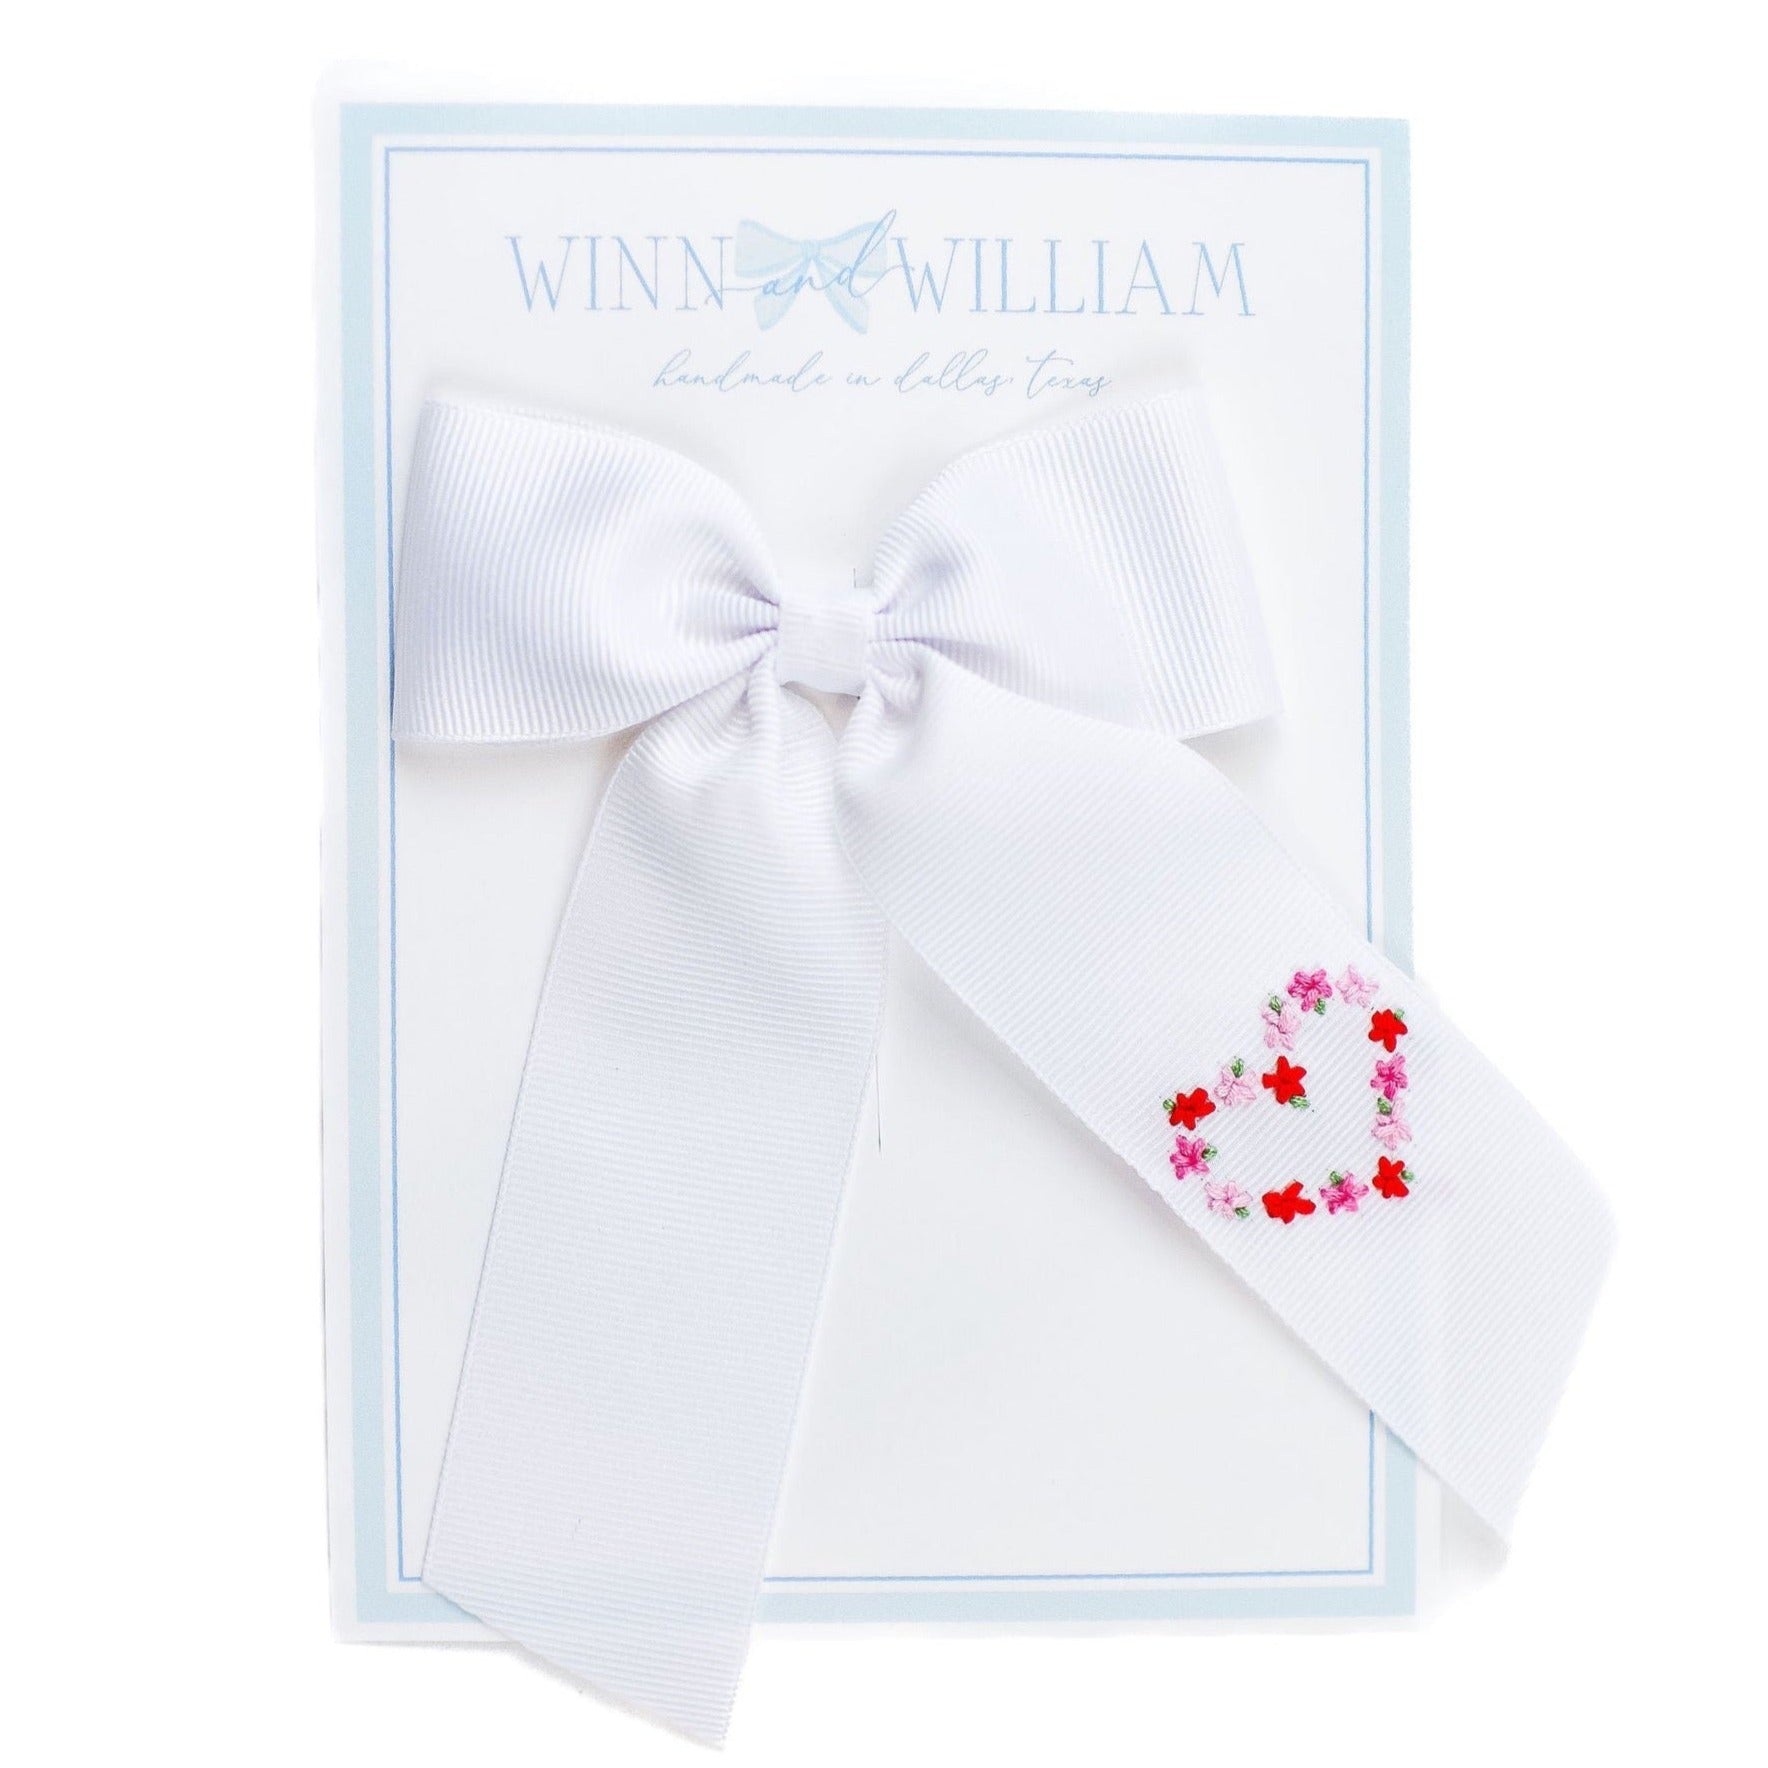 Winn and William Floral Heart Bow